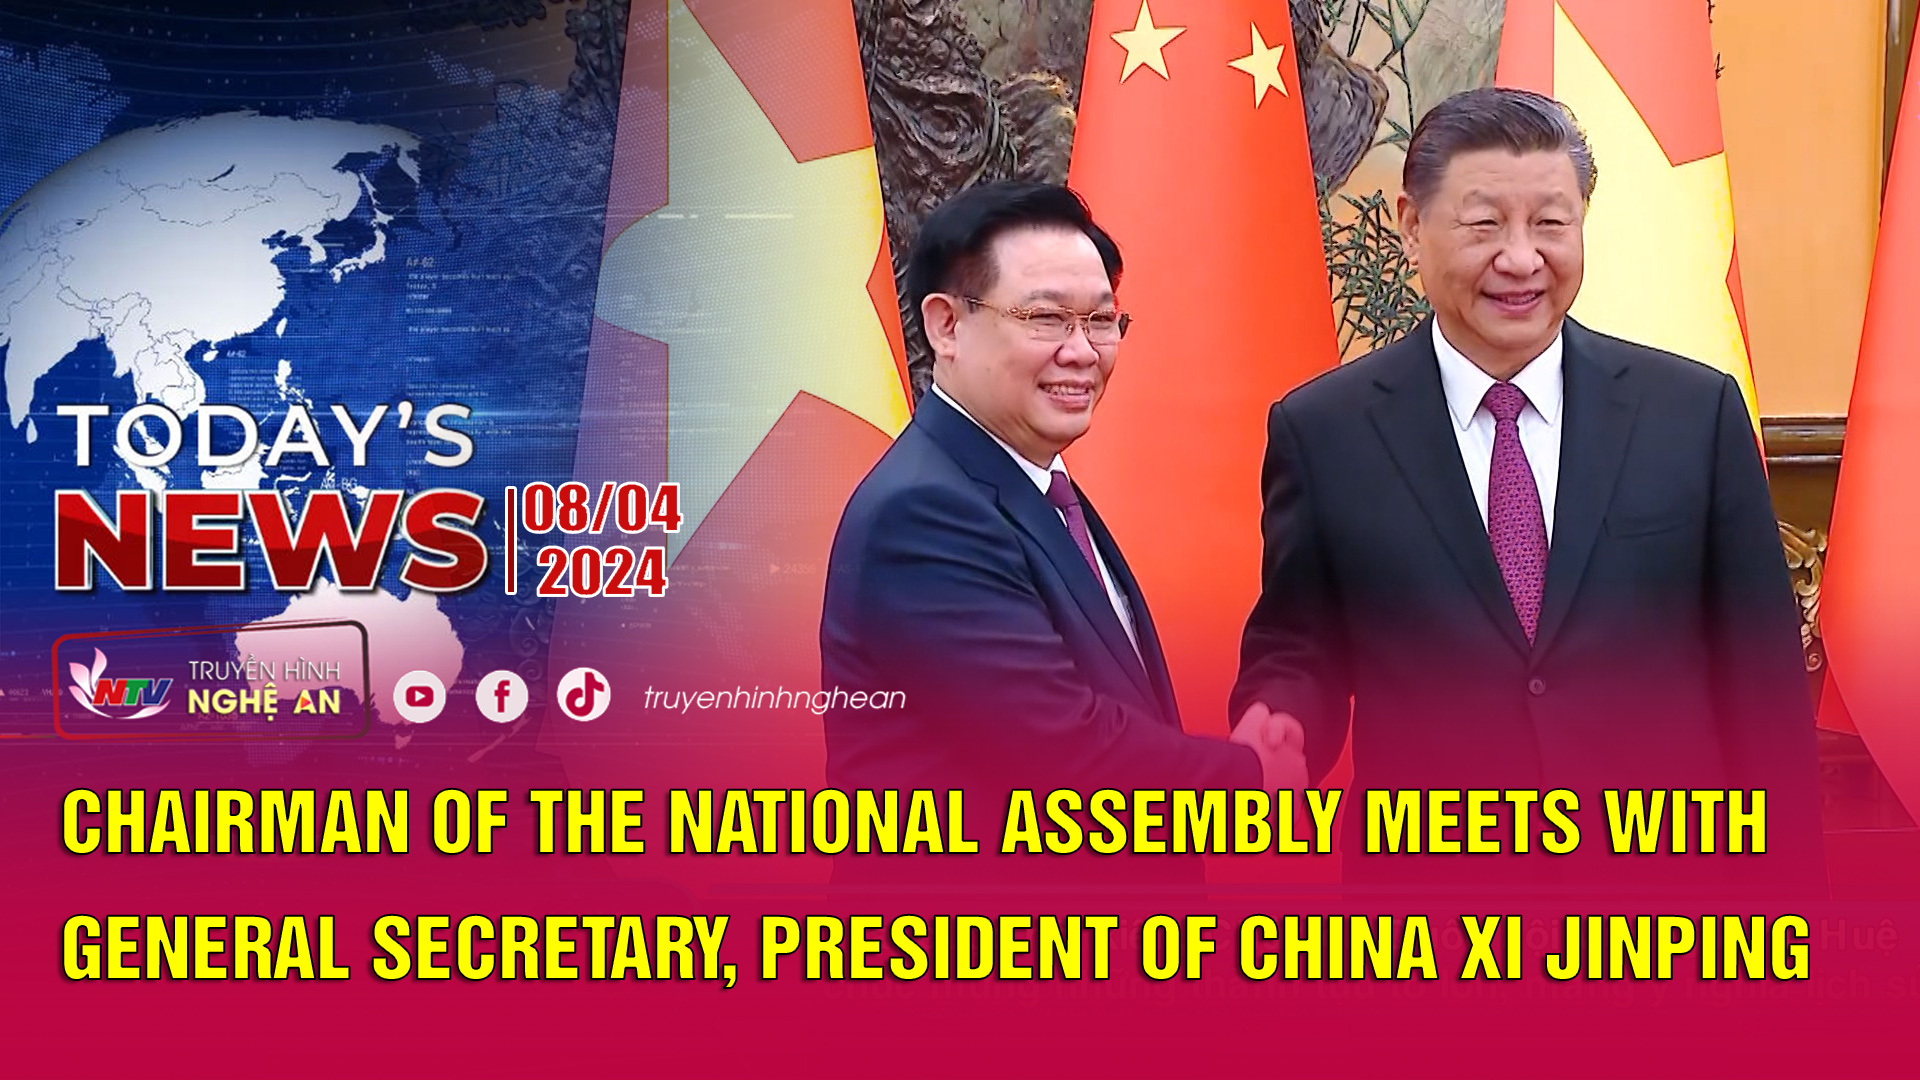 Today's News 8/4/2024: Chairman of the National Assembly Meets with General Secretary, President of China Xi Jinping.